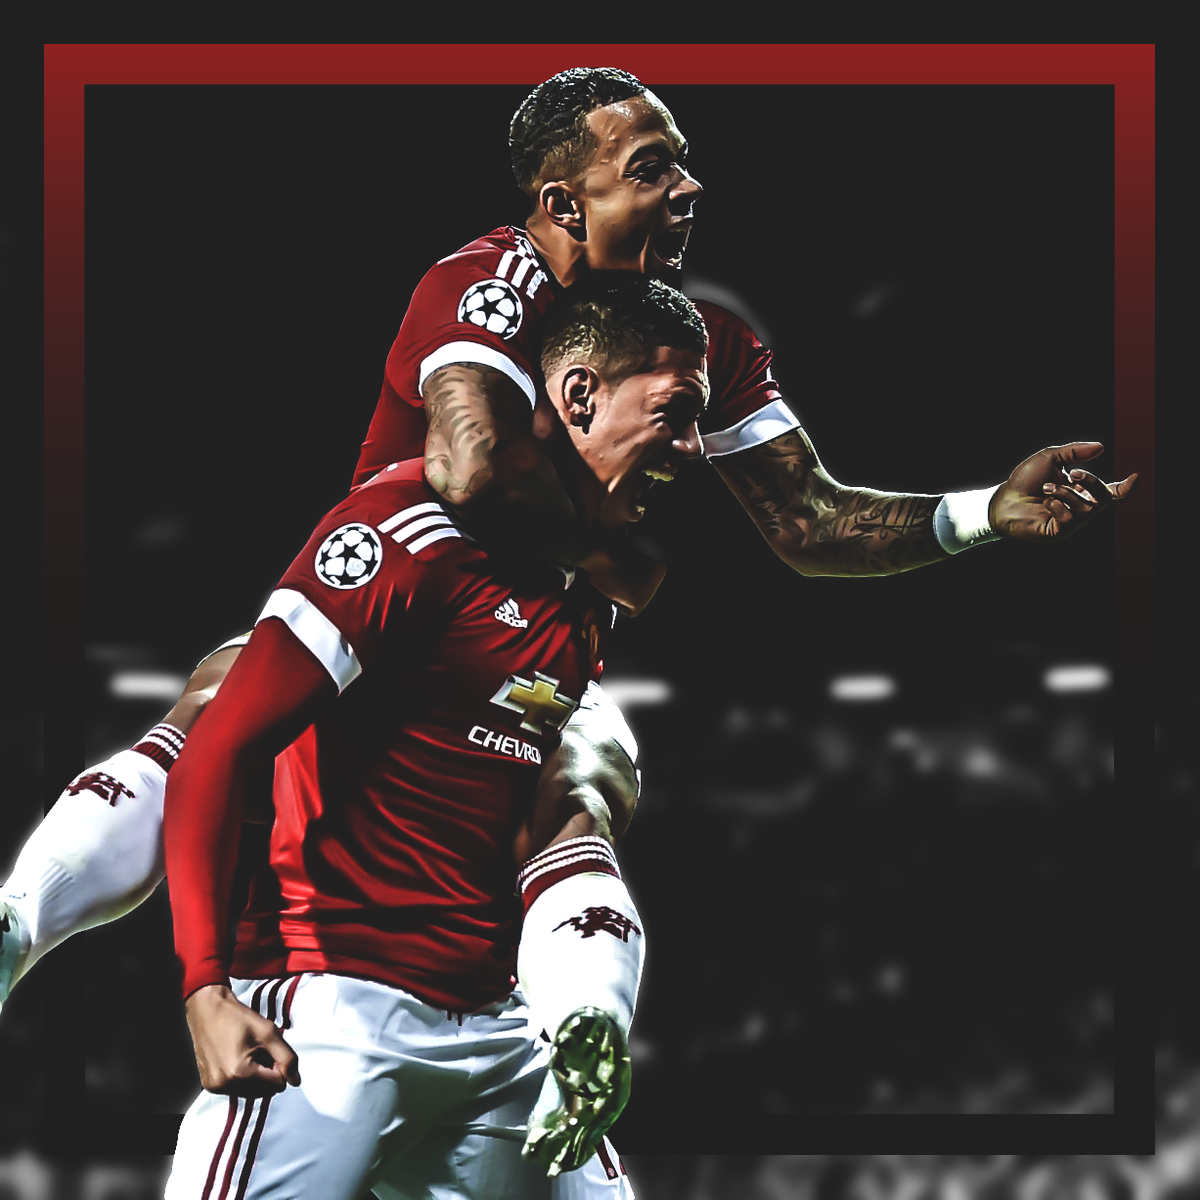 Fredrik Mike Smalling And Memphis. #mufc. IPhone Wallpaper And Icon (2 2)